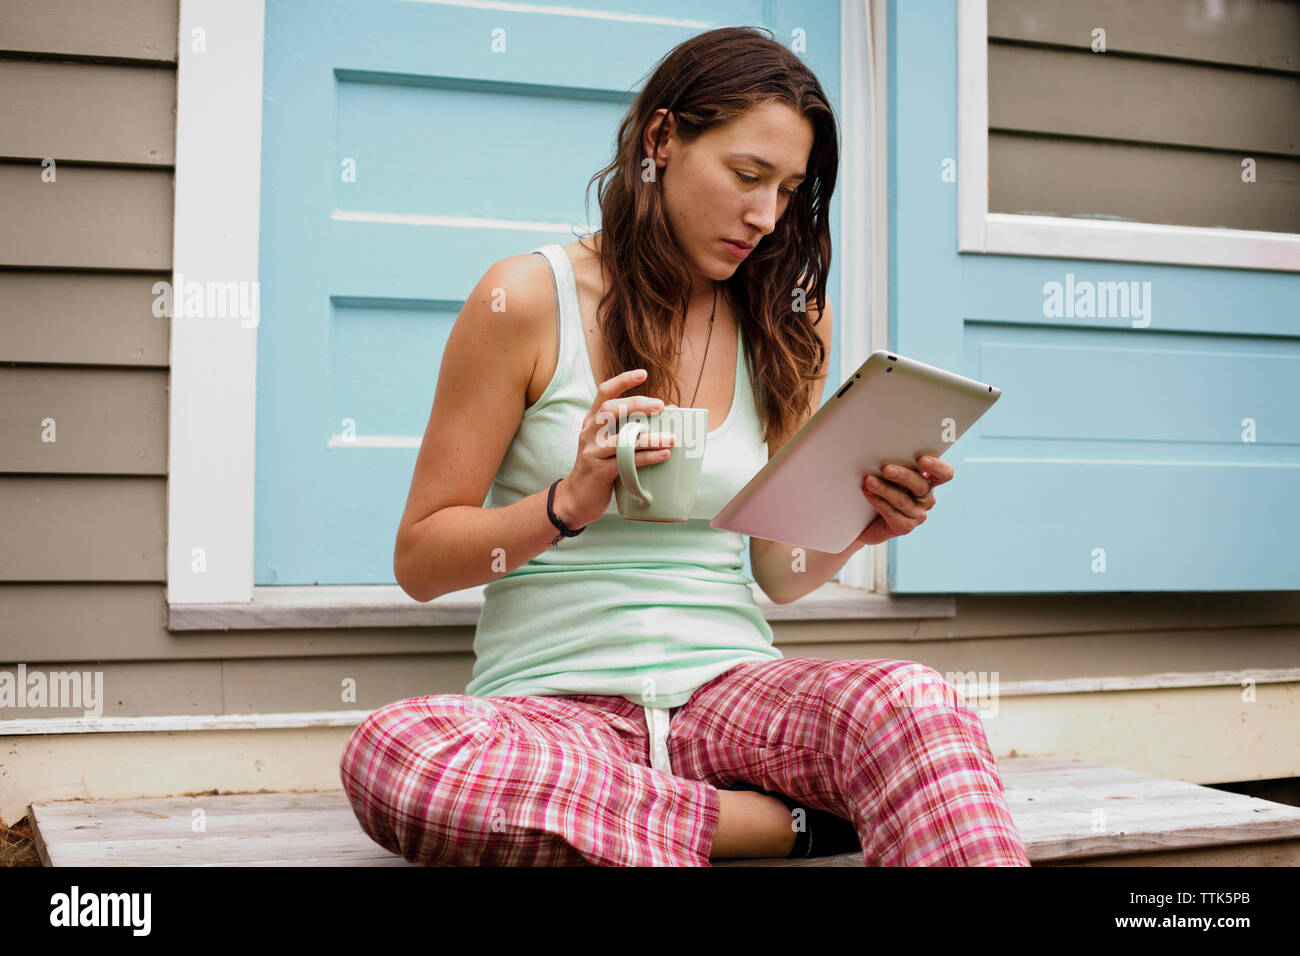 Young woman using tablet computer outside house while holding coffee mug Stock Photo